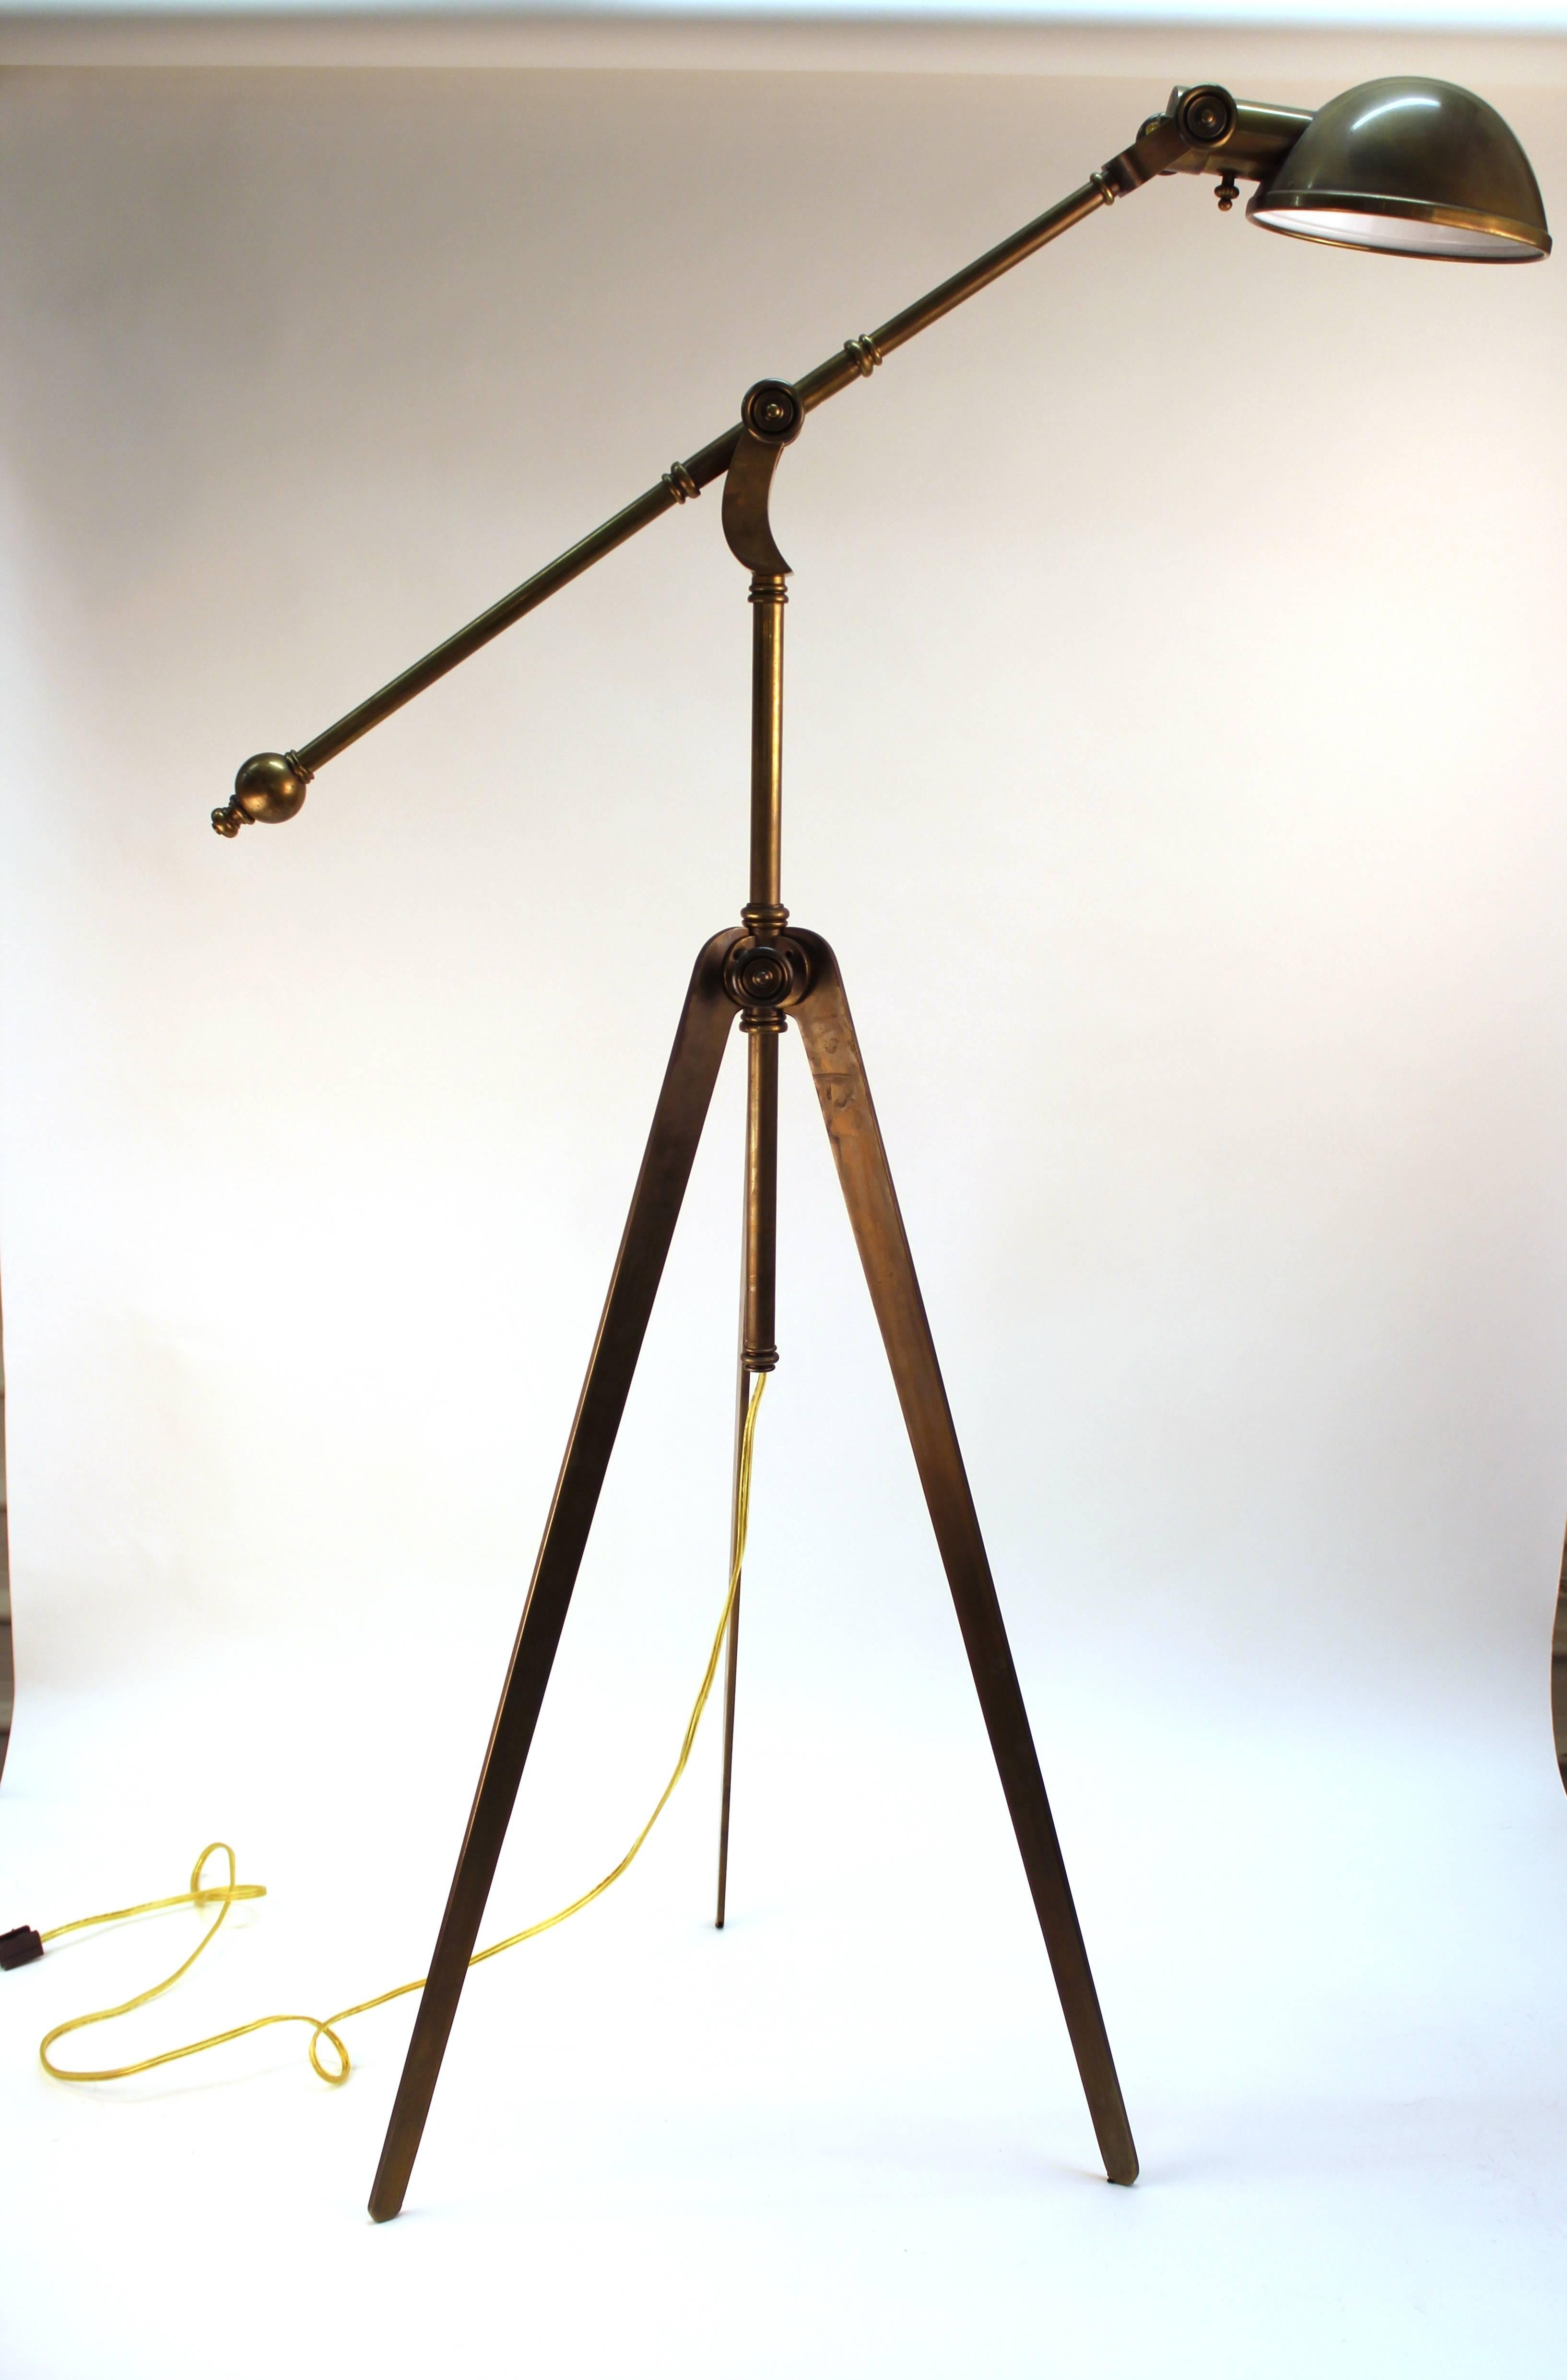 Standing reading lamp in brass. Features an adjustable neck on a tripod base. Wear appropriate to age and use. The lamp is in good condition.